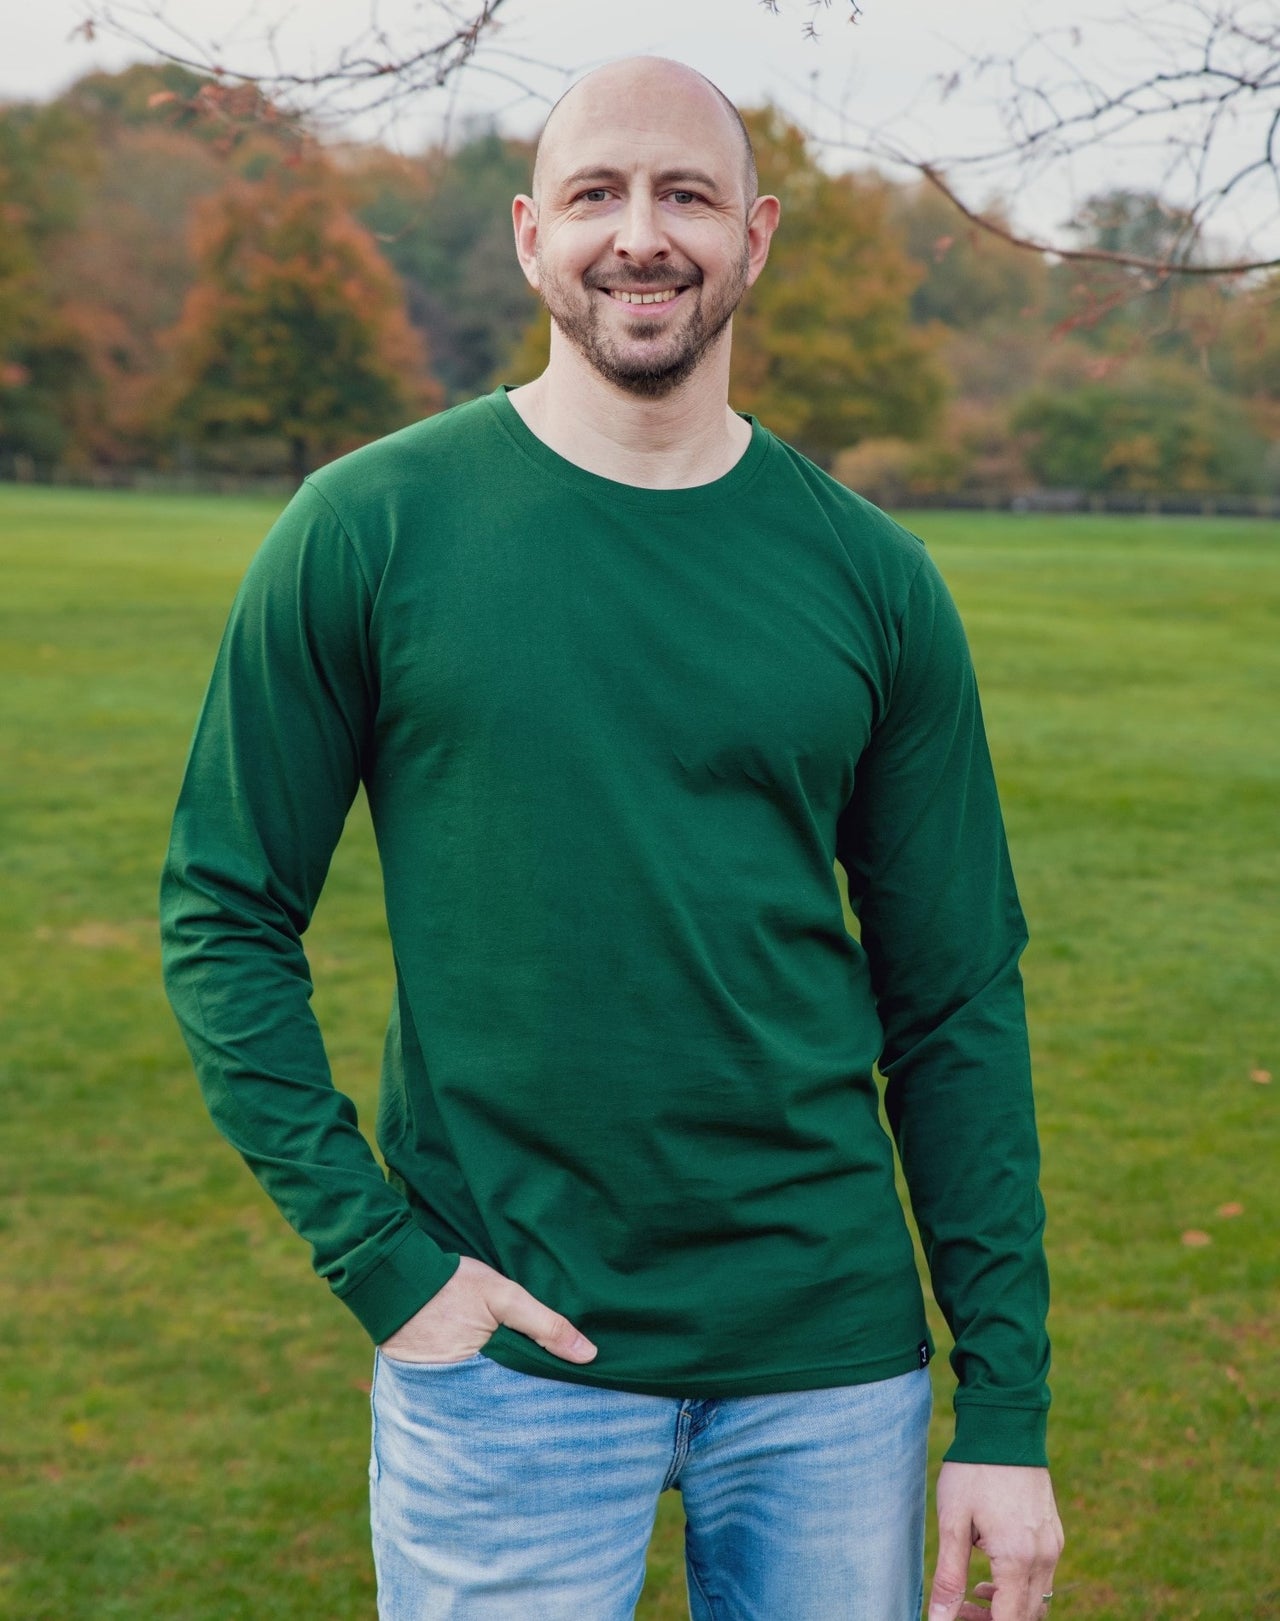 A tall athletic guy wearing a long sleeve dark green tall t-shirt and smiling in a park with one hand in pocket.